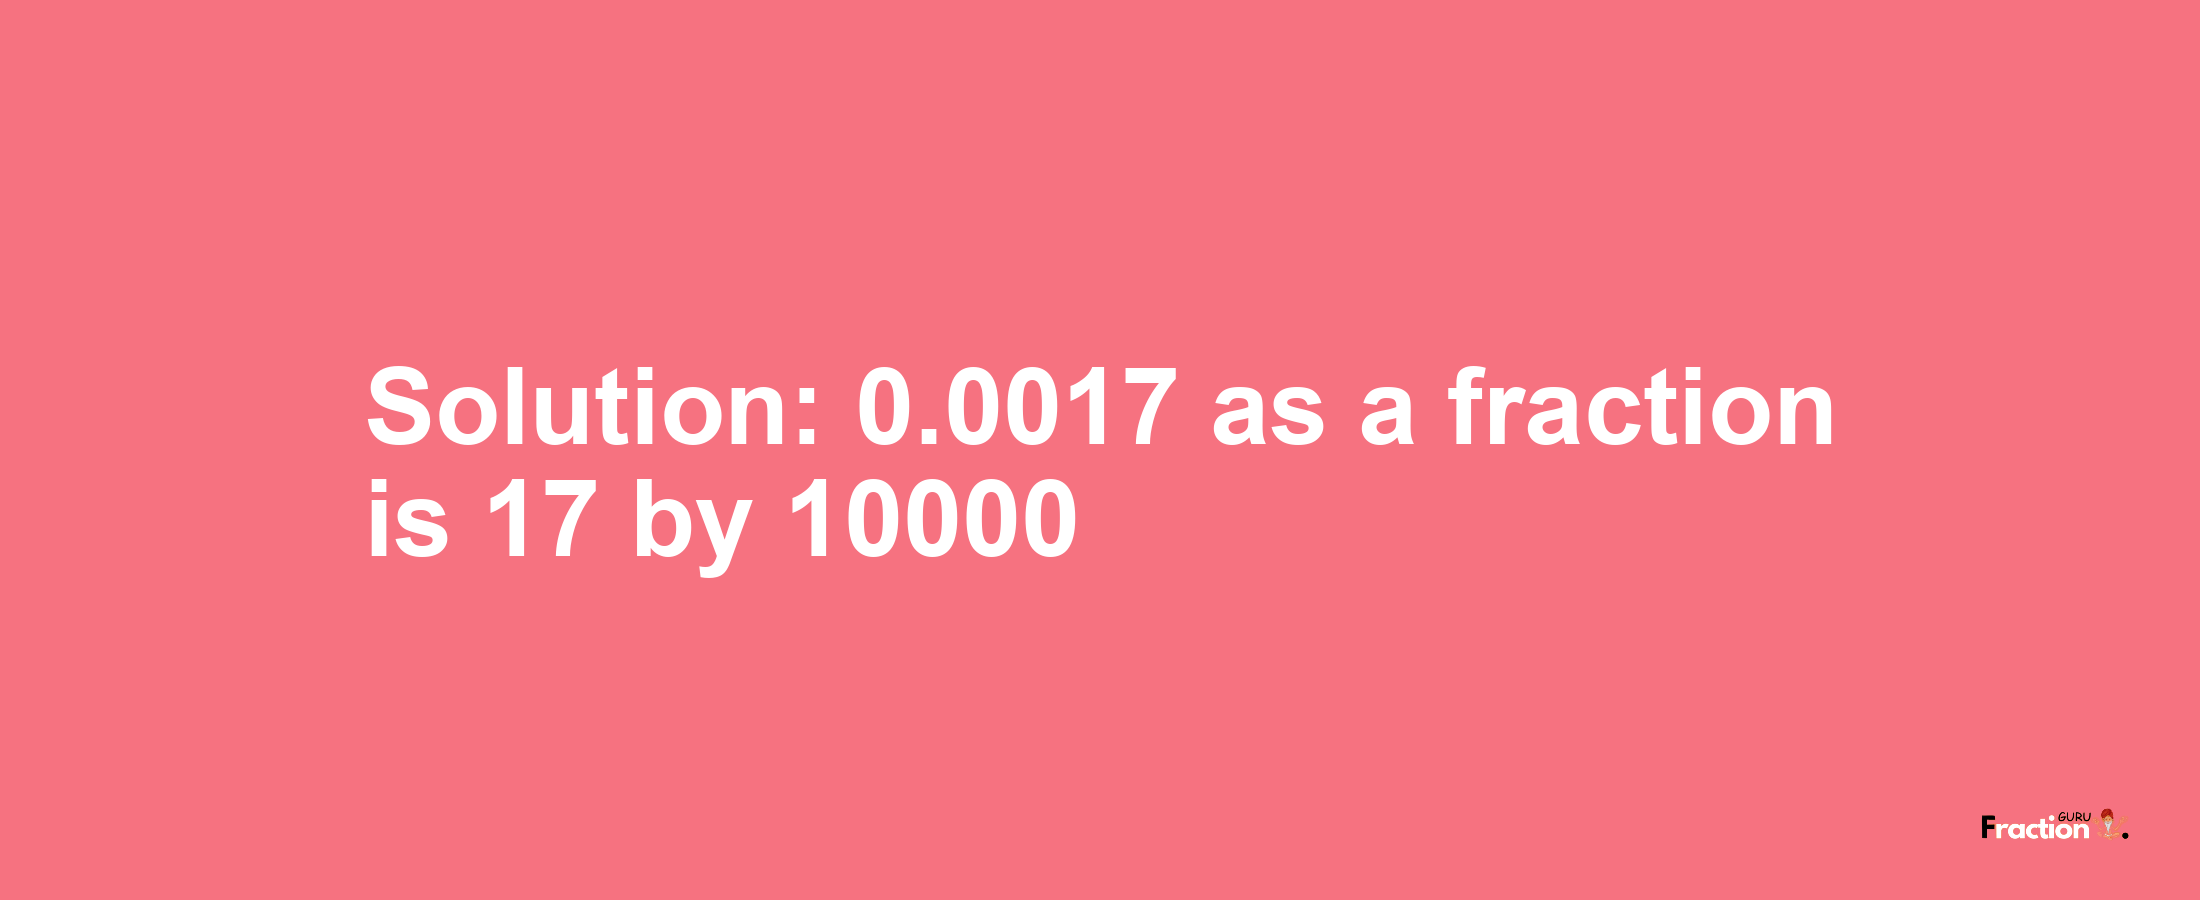 Solution:0.0017 as a fraction is 17/10000